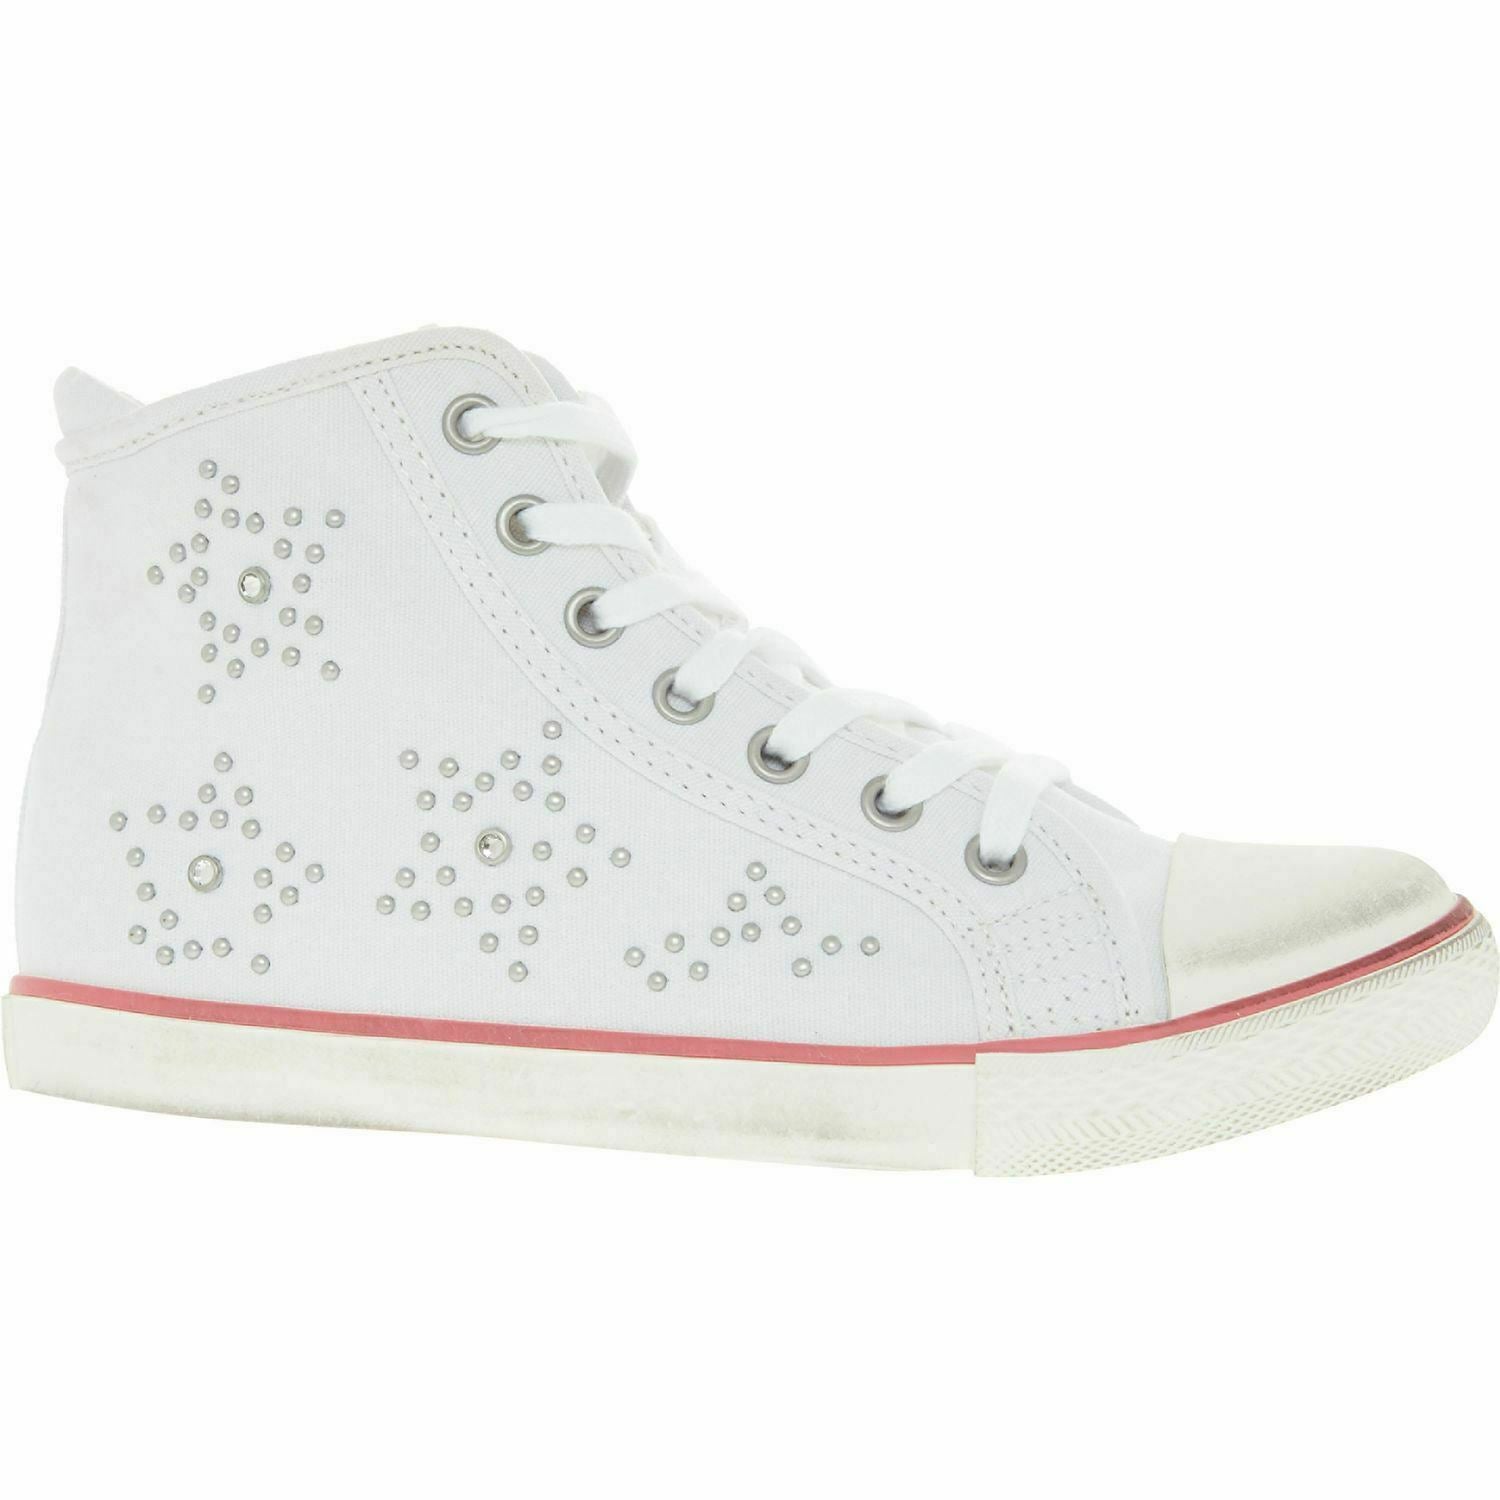 PEPE JEANS Girls' White Distressed Canvas Hi Top Trainers, size UK junior 4